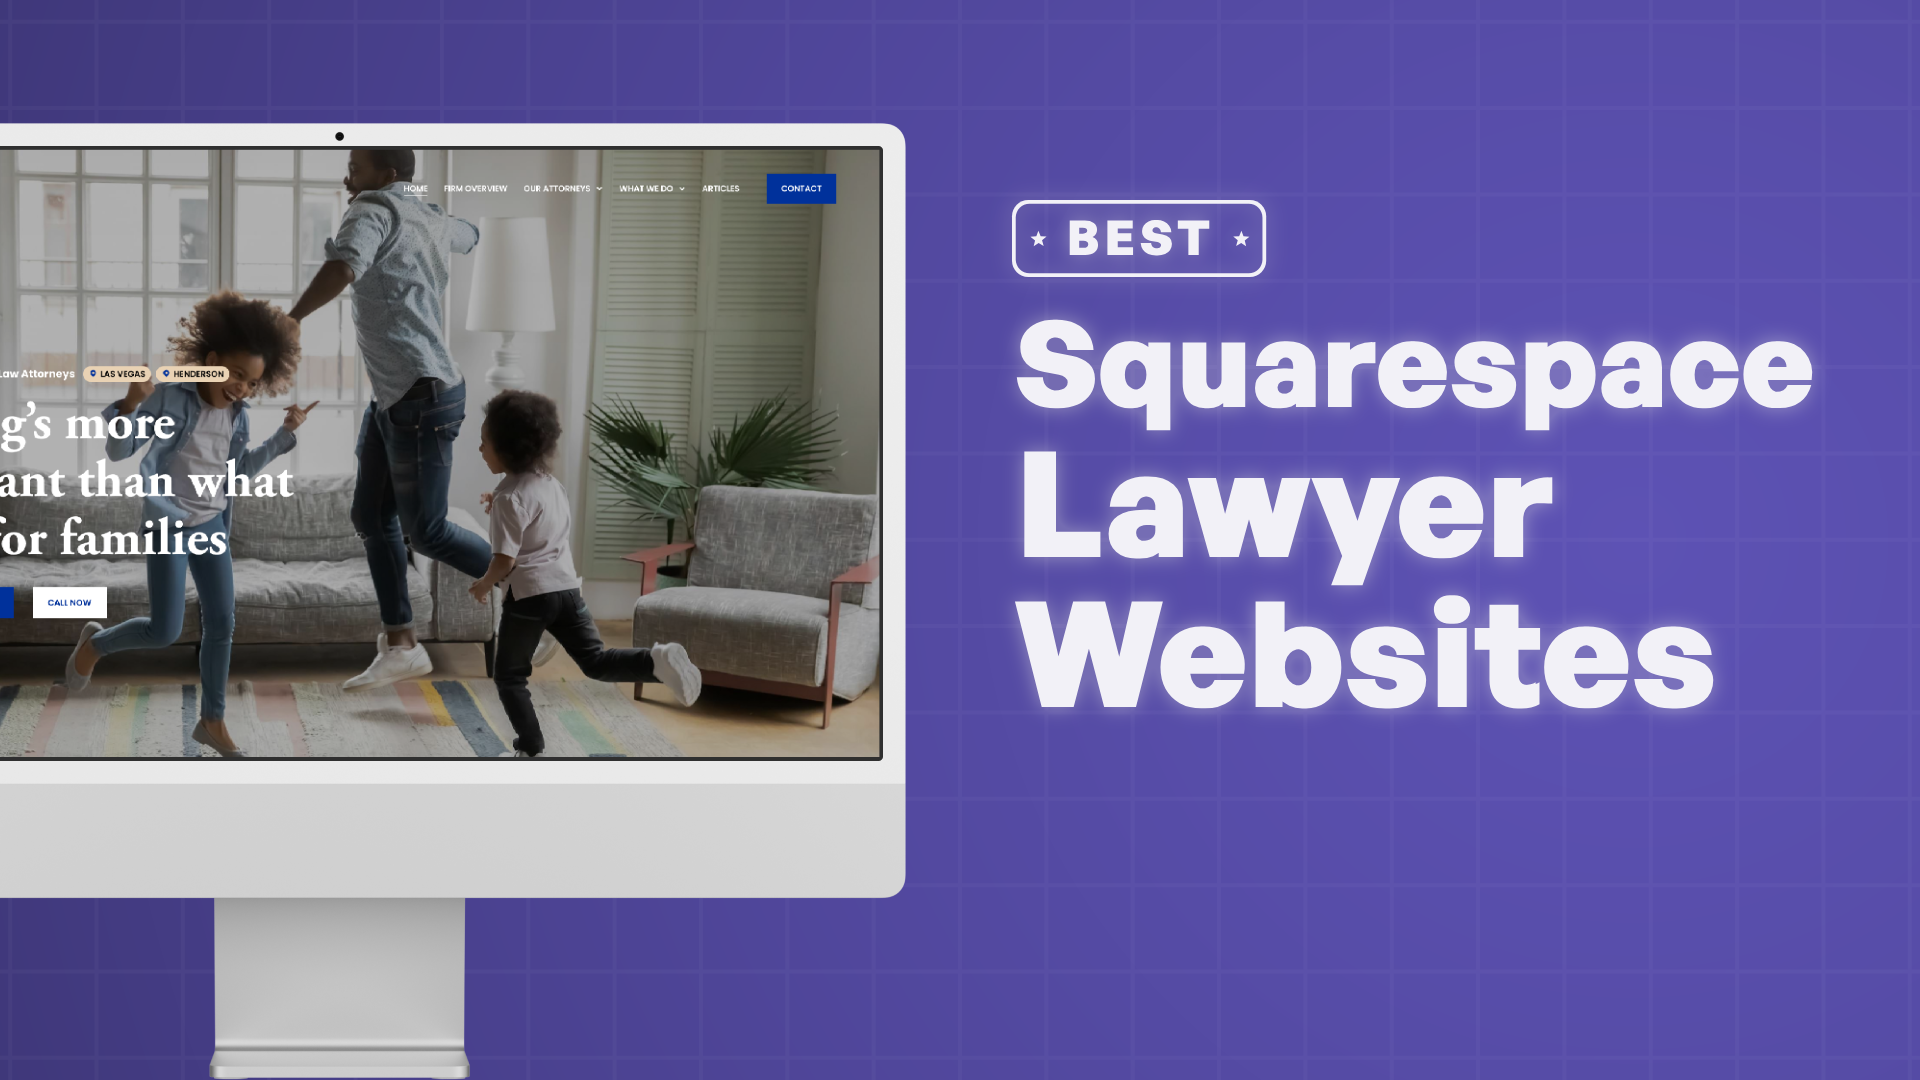 "Best Law Firm Websites on Squarespace" with screenshots of the lawyer's websites on Squarespace